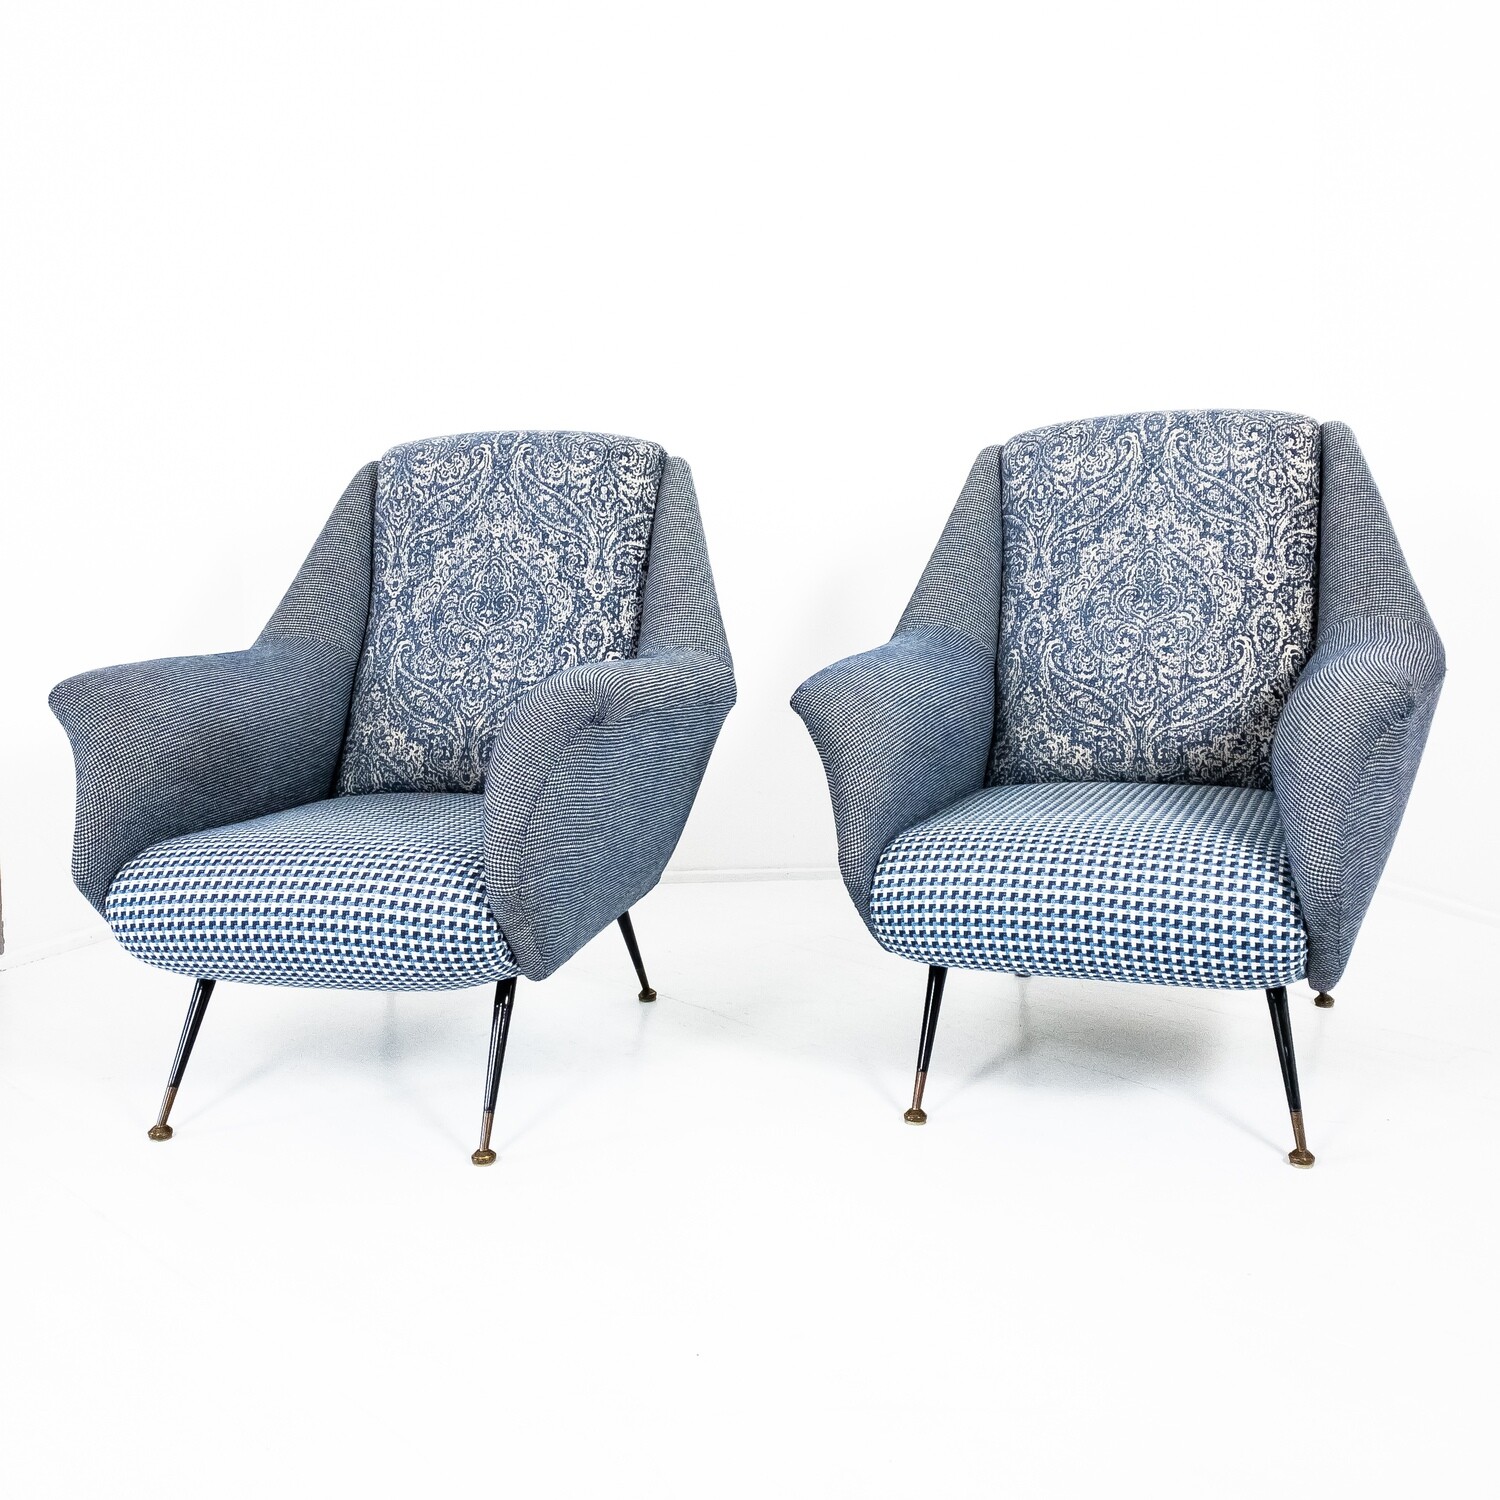 Set of 2 armchairs in the style of Marco Zanuso 1950s